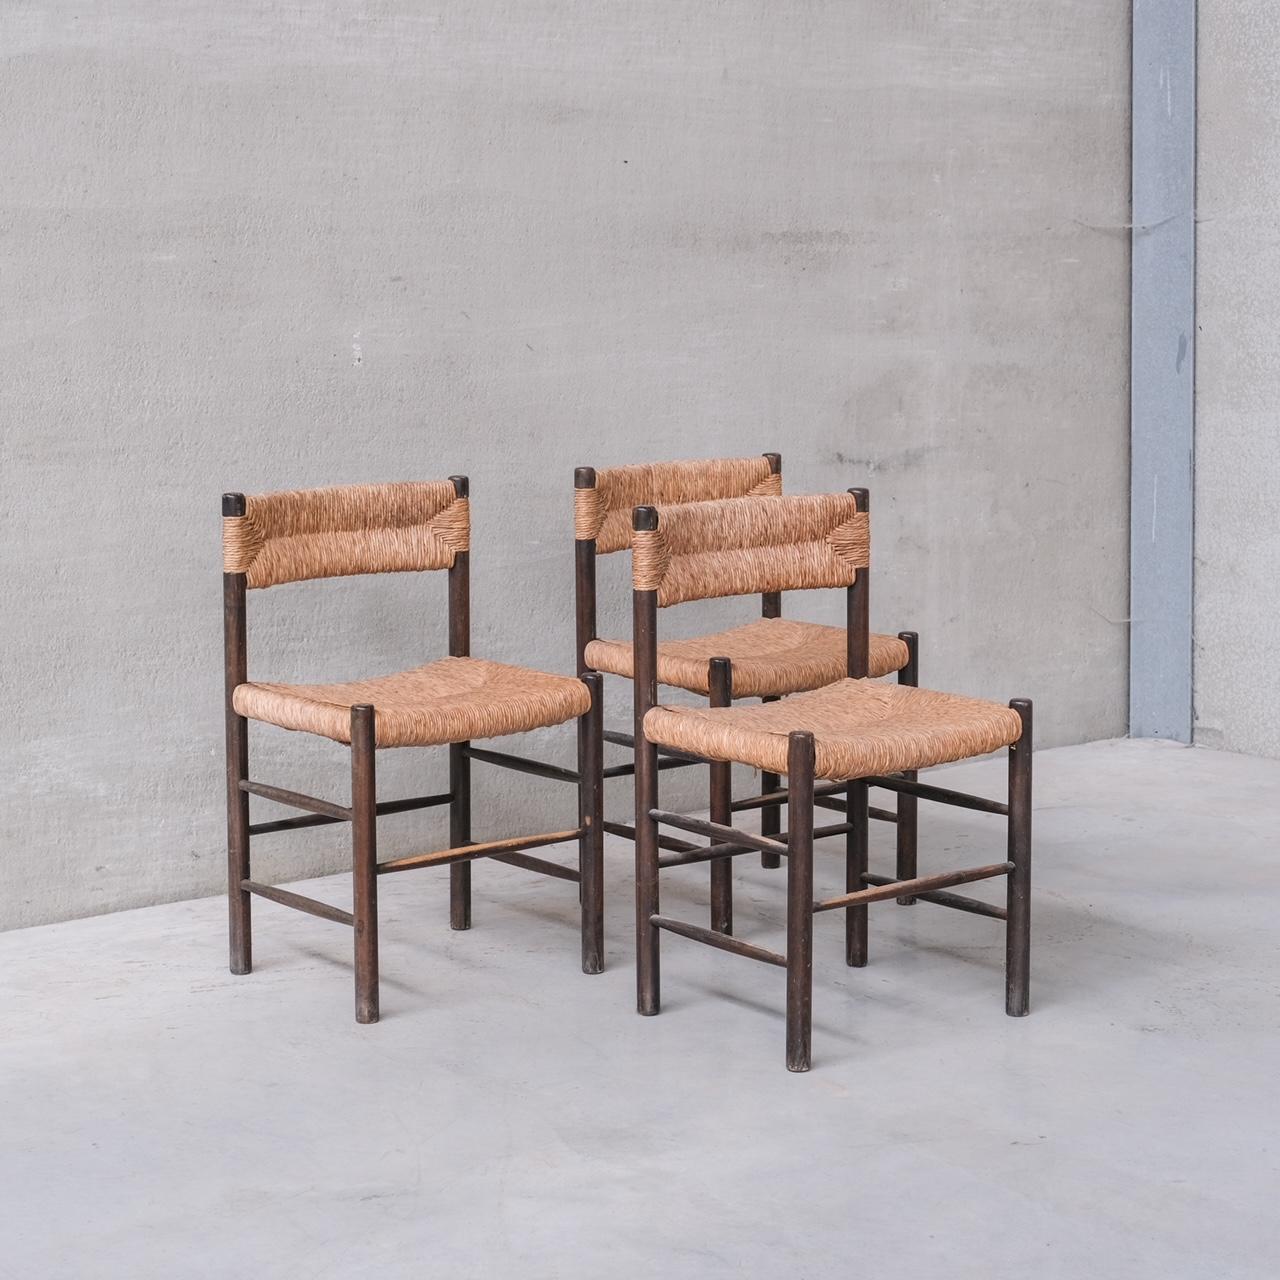 Set of Three Charlotte Perriand 'Dordogne' Model Mid-Century Dining Chairs For Sale 7